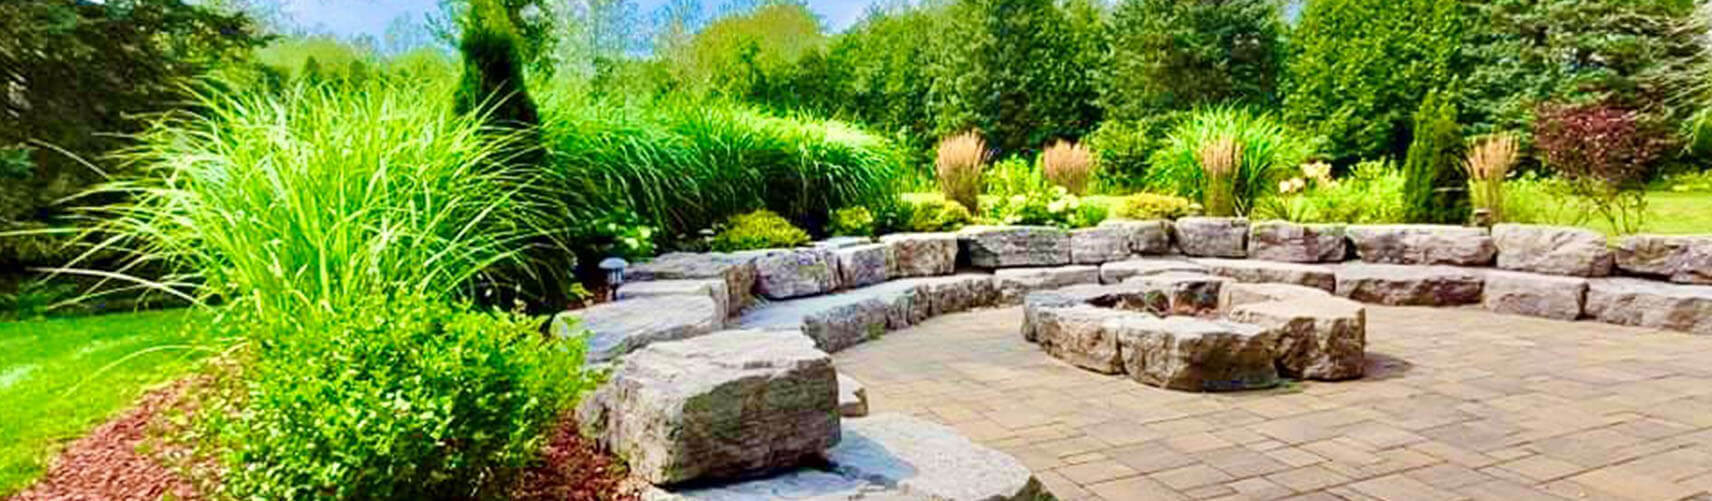 Newmarket Landscaping Company, Landscaper and Landscaping Services